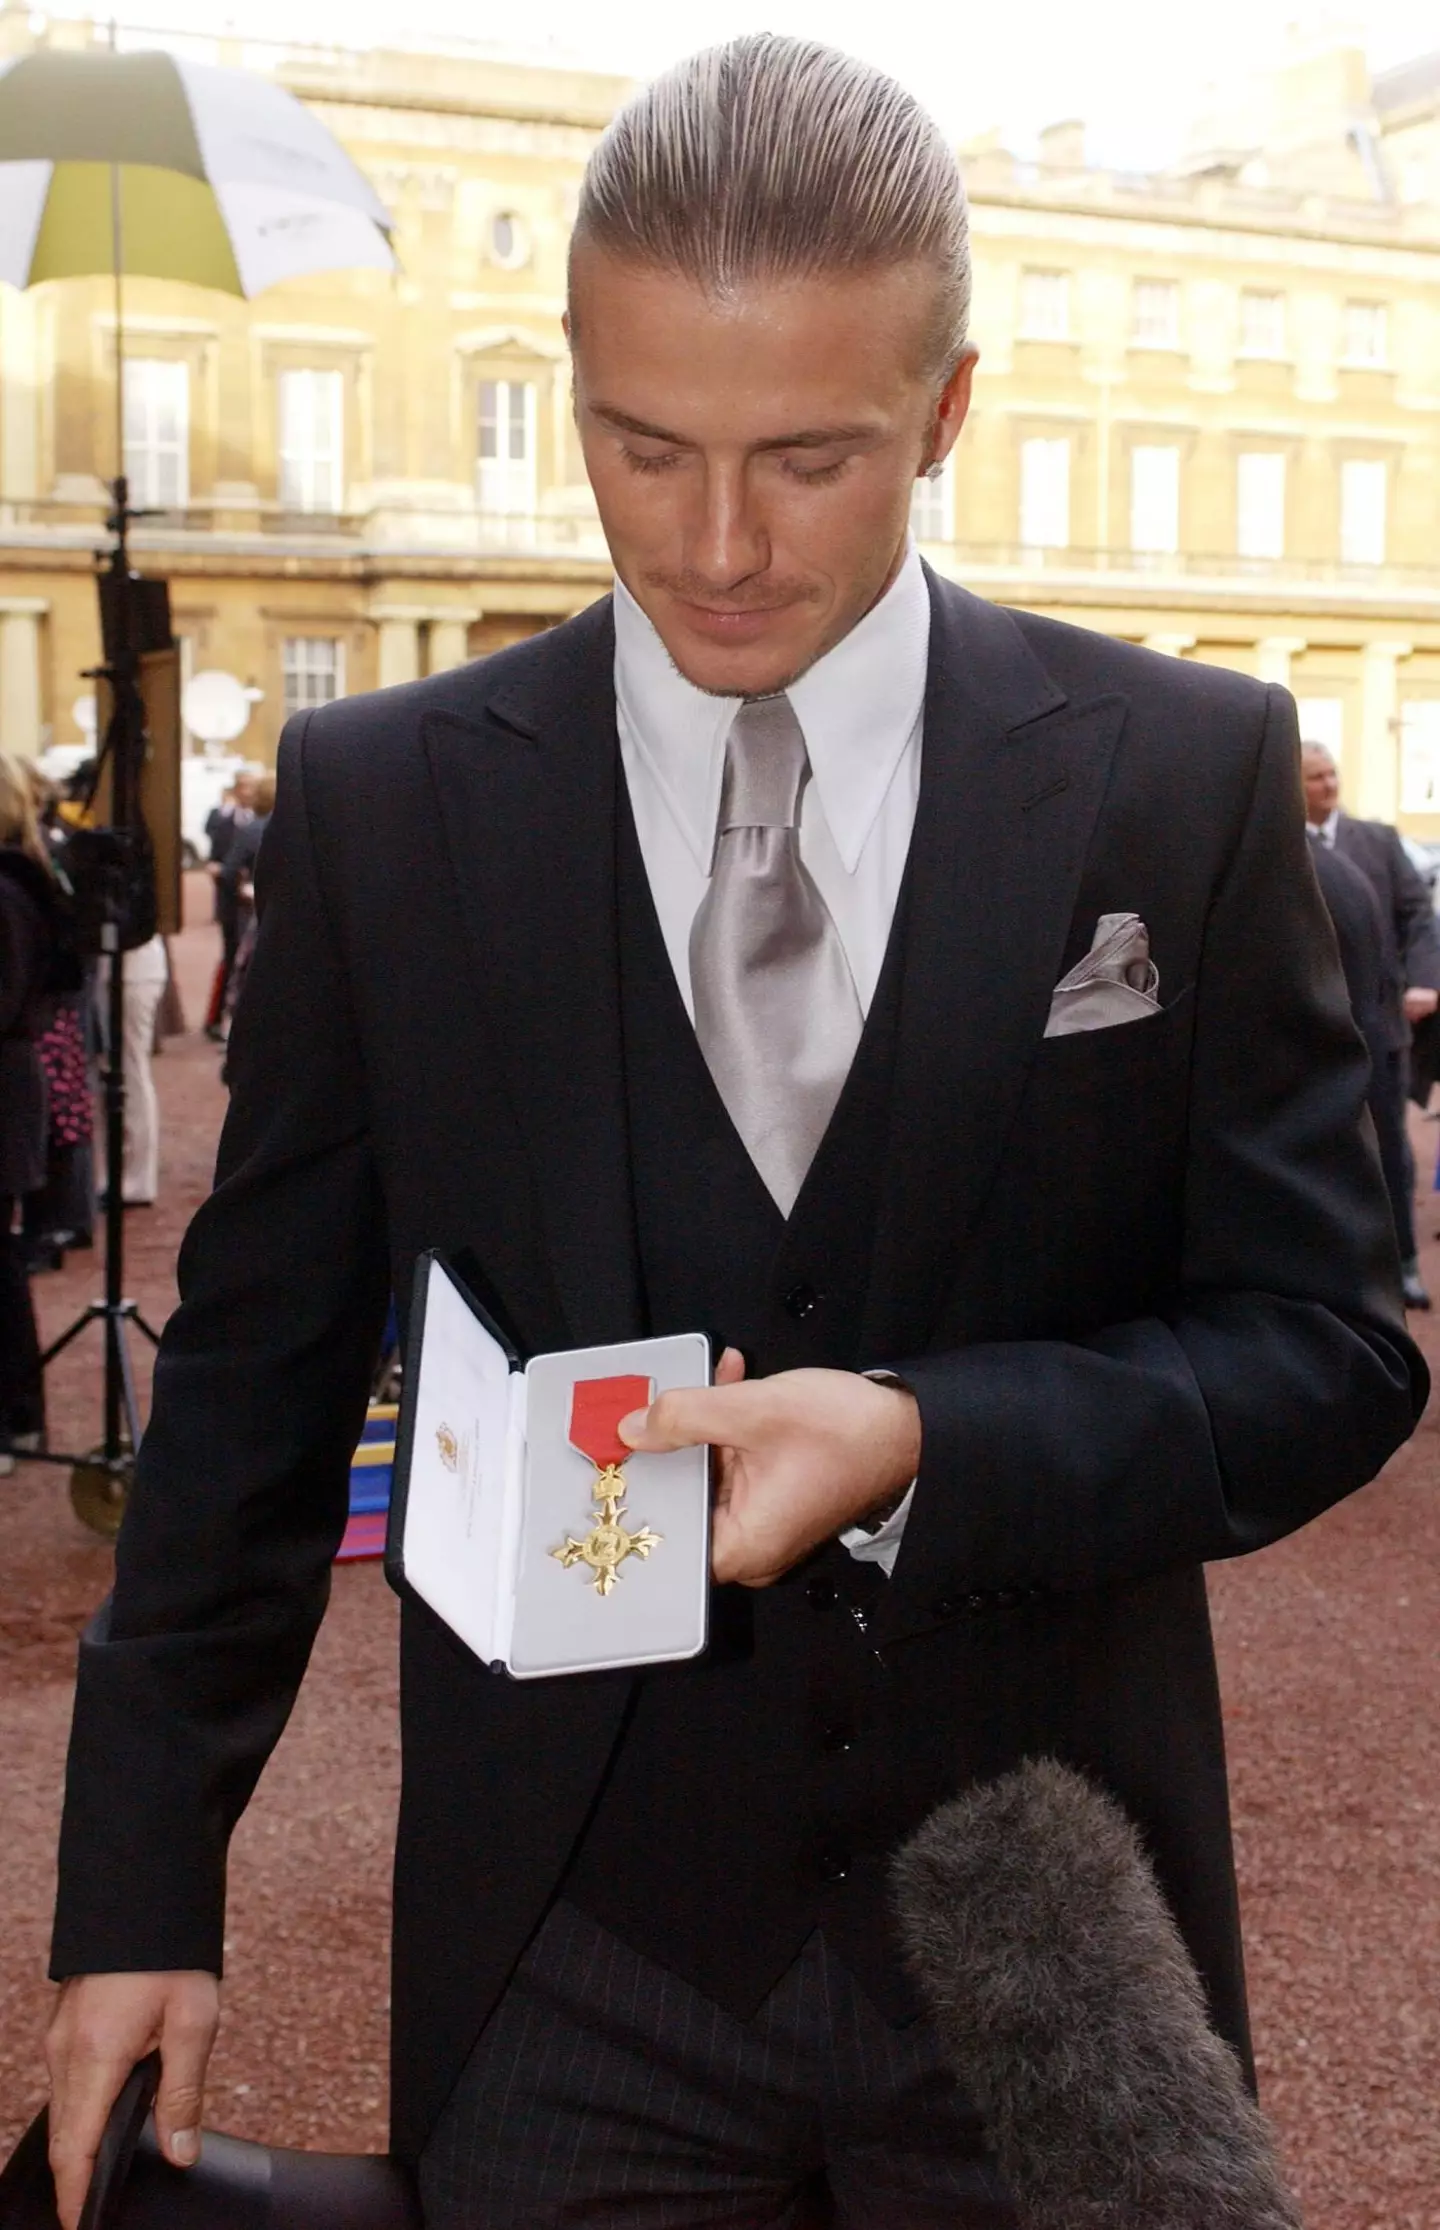 Beckham was awarded an OBE in 2003 (Image: Alamy)